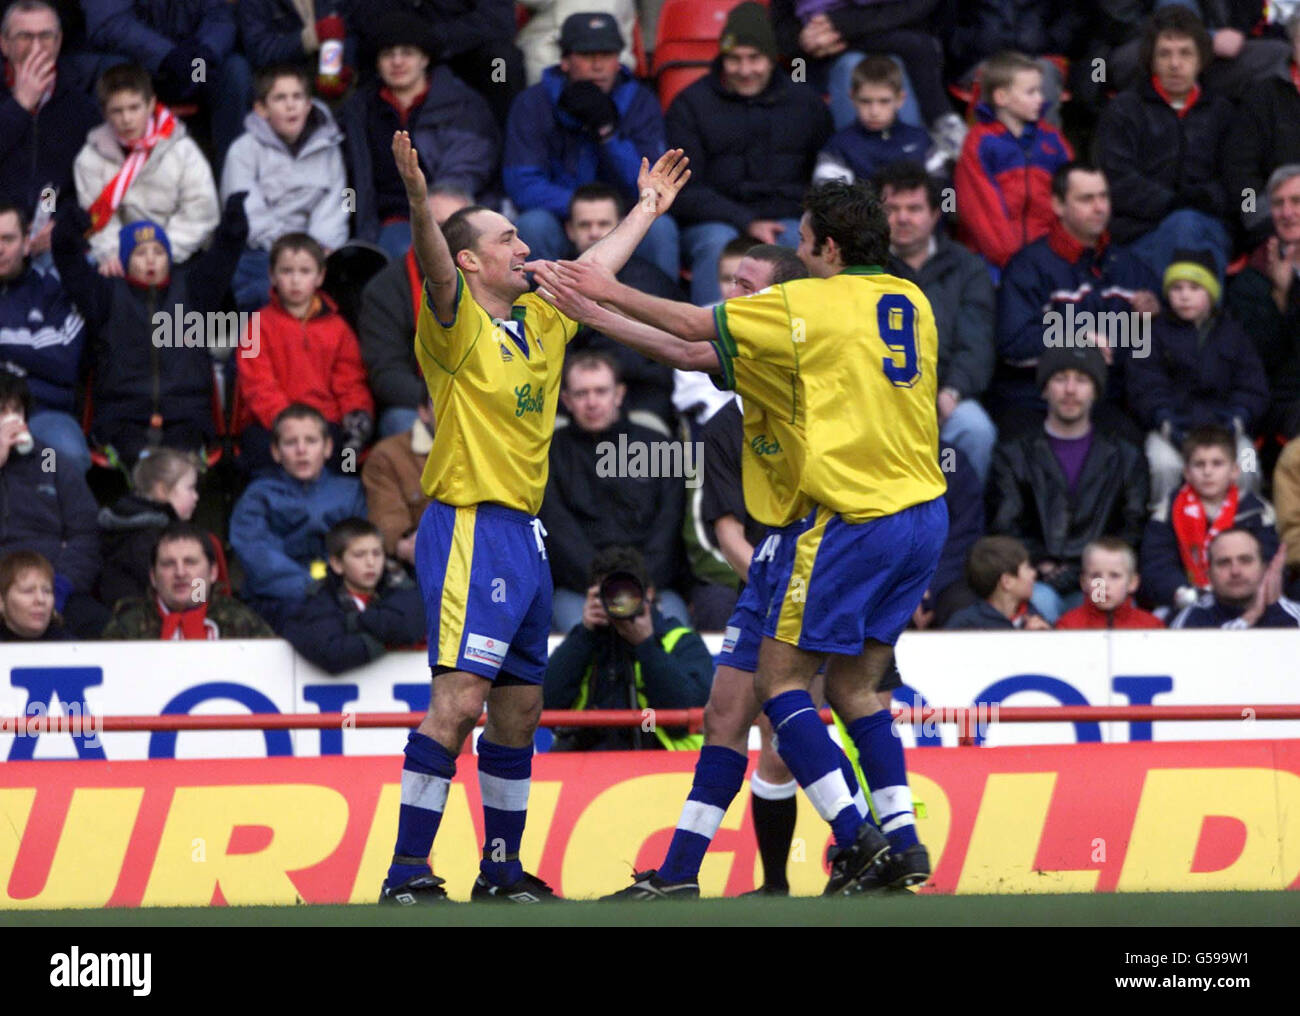 Kingstonian's Phil Wingfield (left) celebrates scoring against Bristol City during the FA Cup Fourth Round match at Ashton Gate, Bristol. Stock Photo